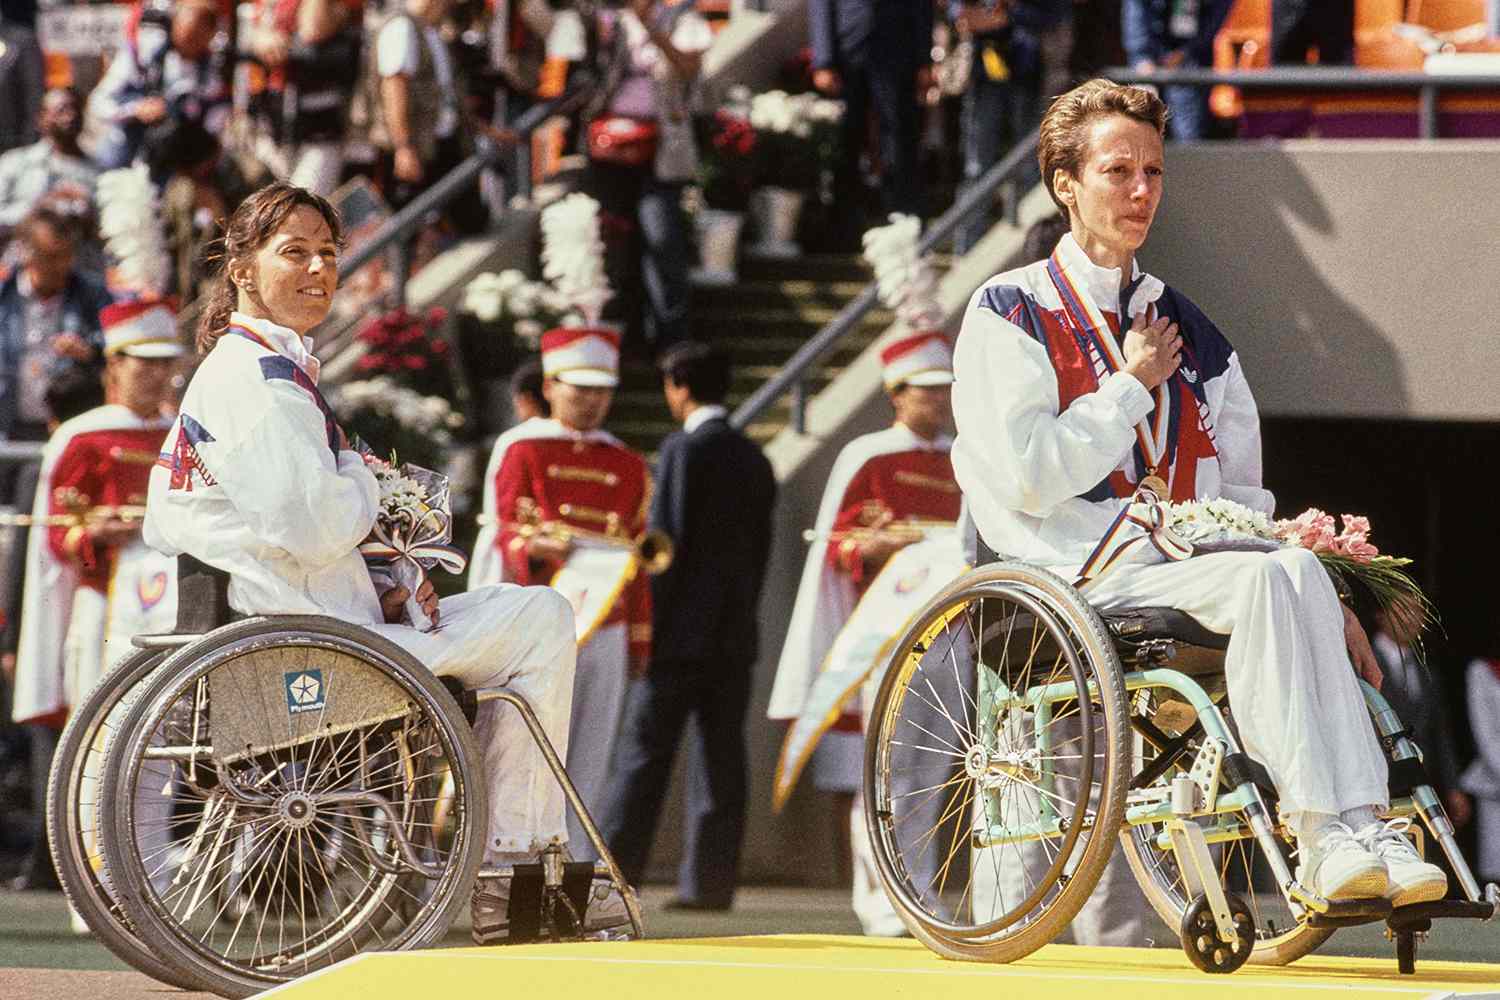 Gold medalist Sharon Hedrick from the United States with third placed bronze medalist compatriot Candace Cable during the playing of the national anthem at the awards ceremony after winning the Women's 800 metres wheelchair demonstration race at the XXIV Summer Olympic Games.